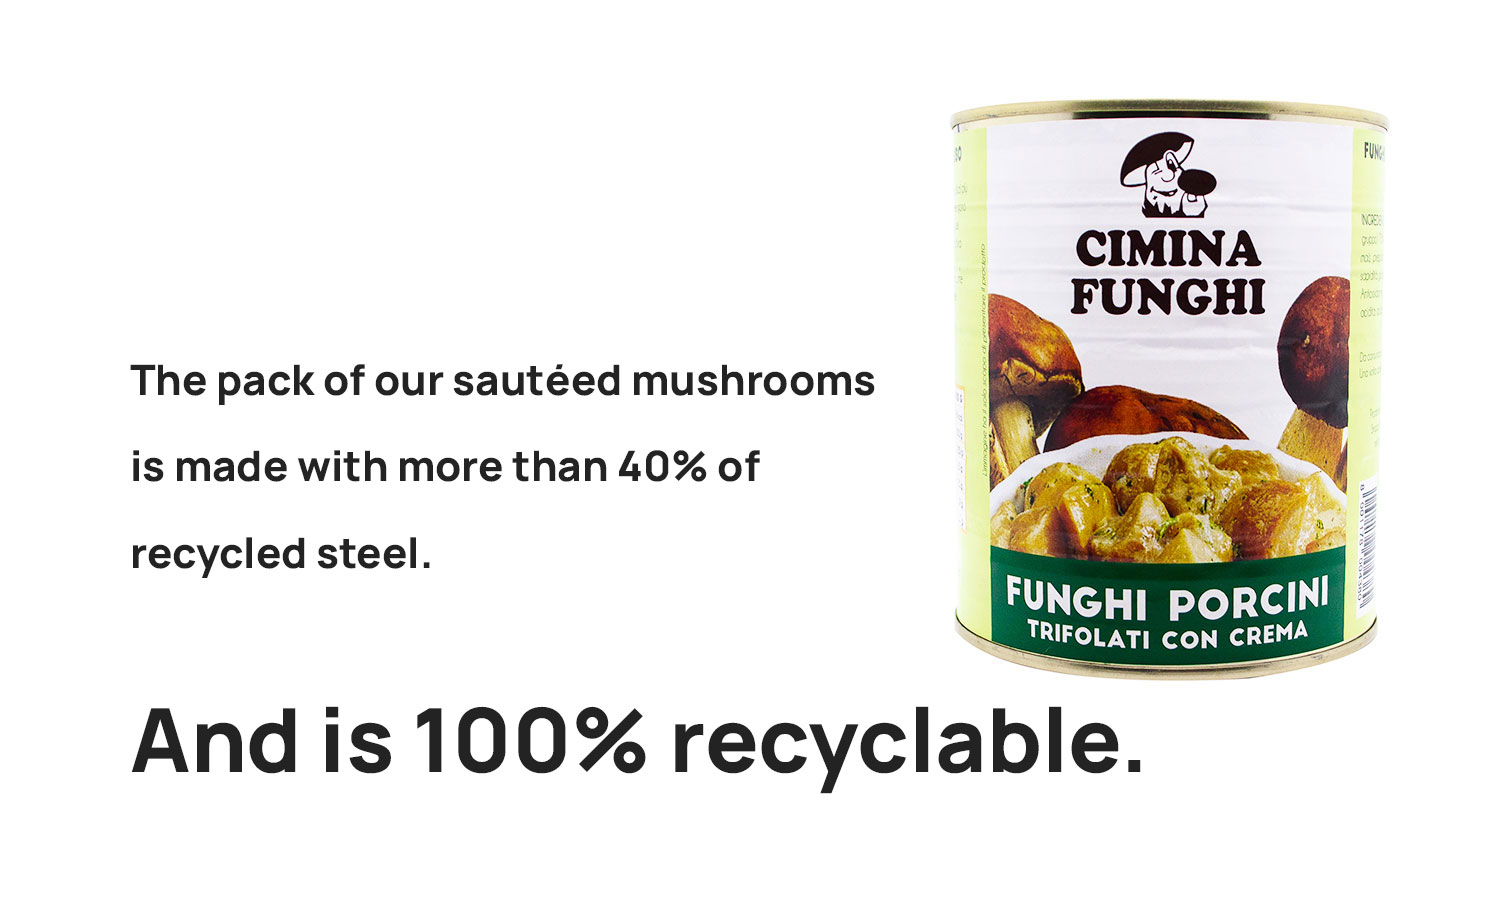 Recyclable packaging of Sautéed Porcini Mushrooms - Cimina Funghi